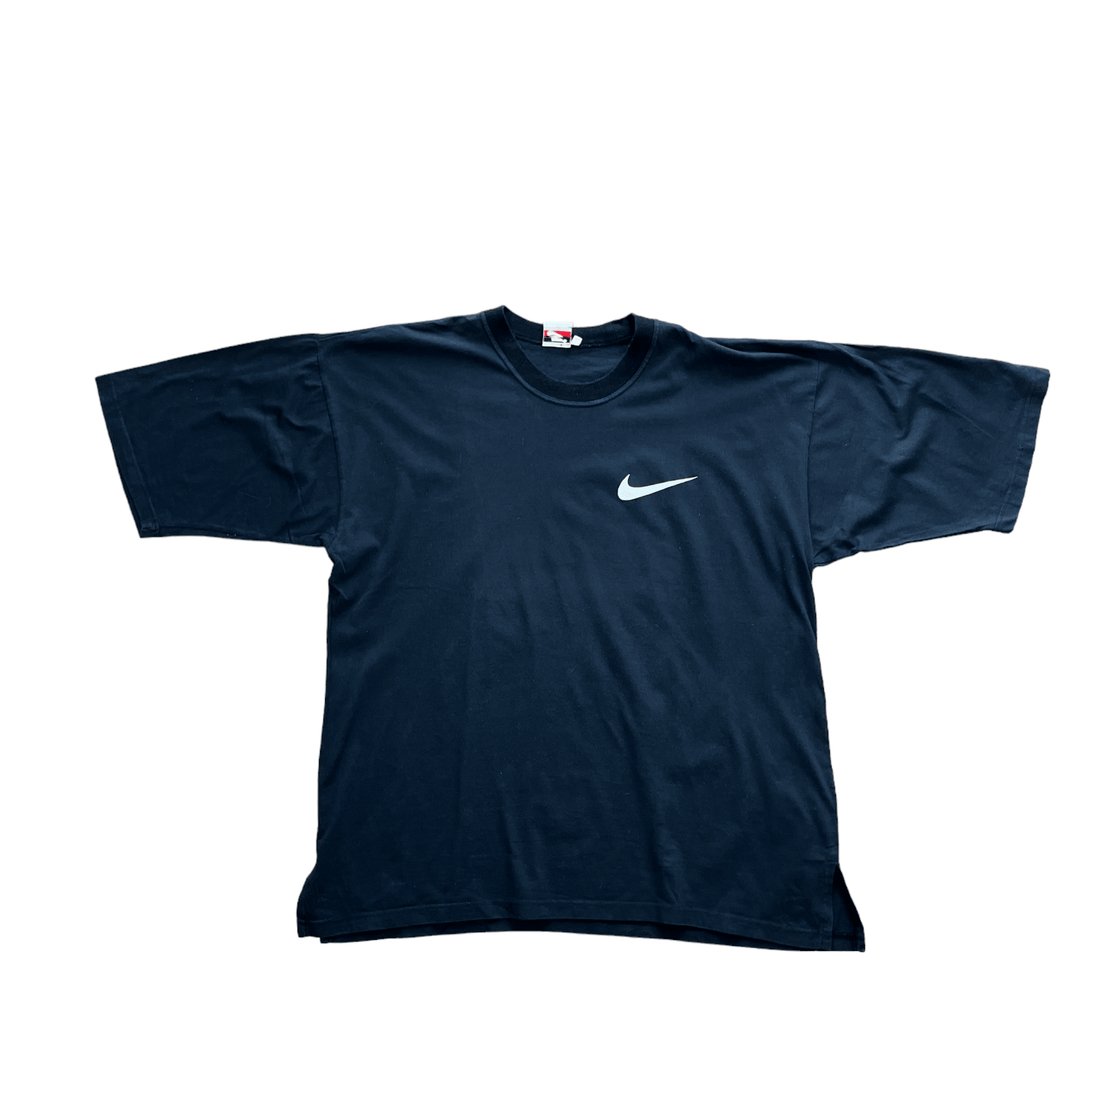 Vintage 90s Black Nike Tee - Recommended Size - Extra Large - The Streetwear Studio